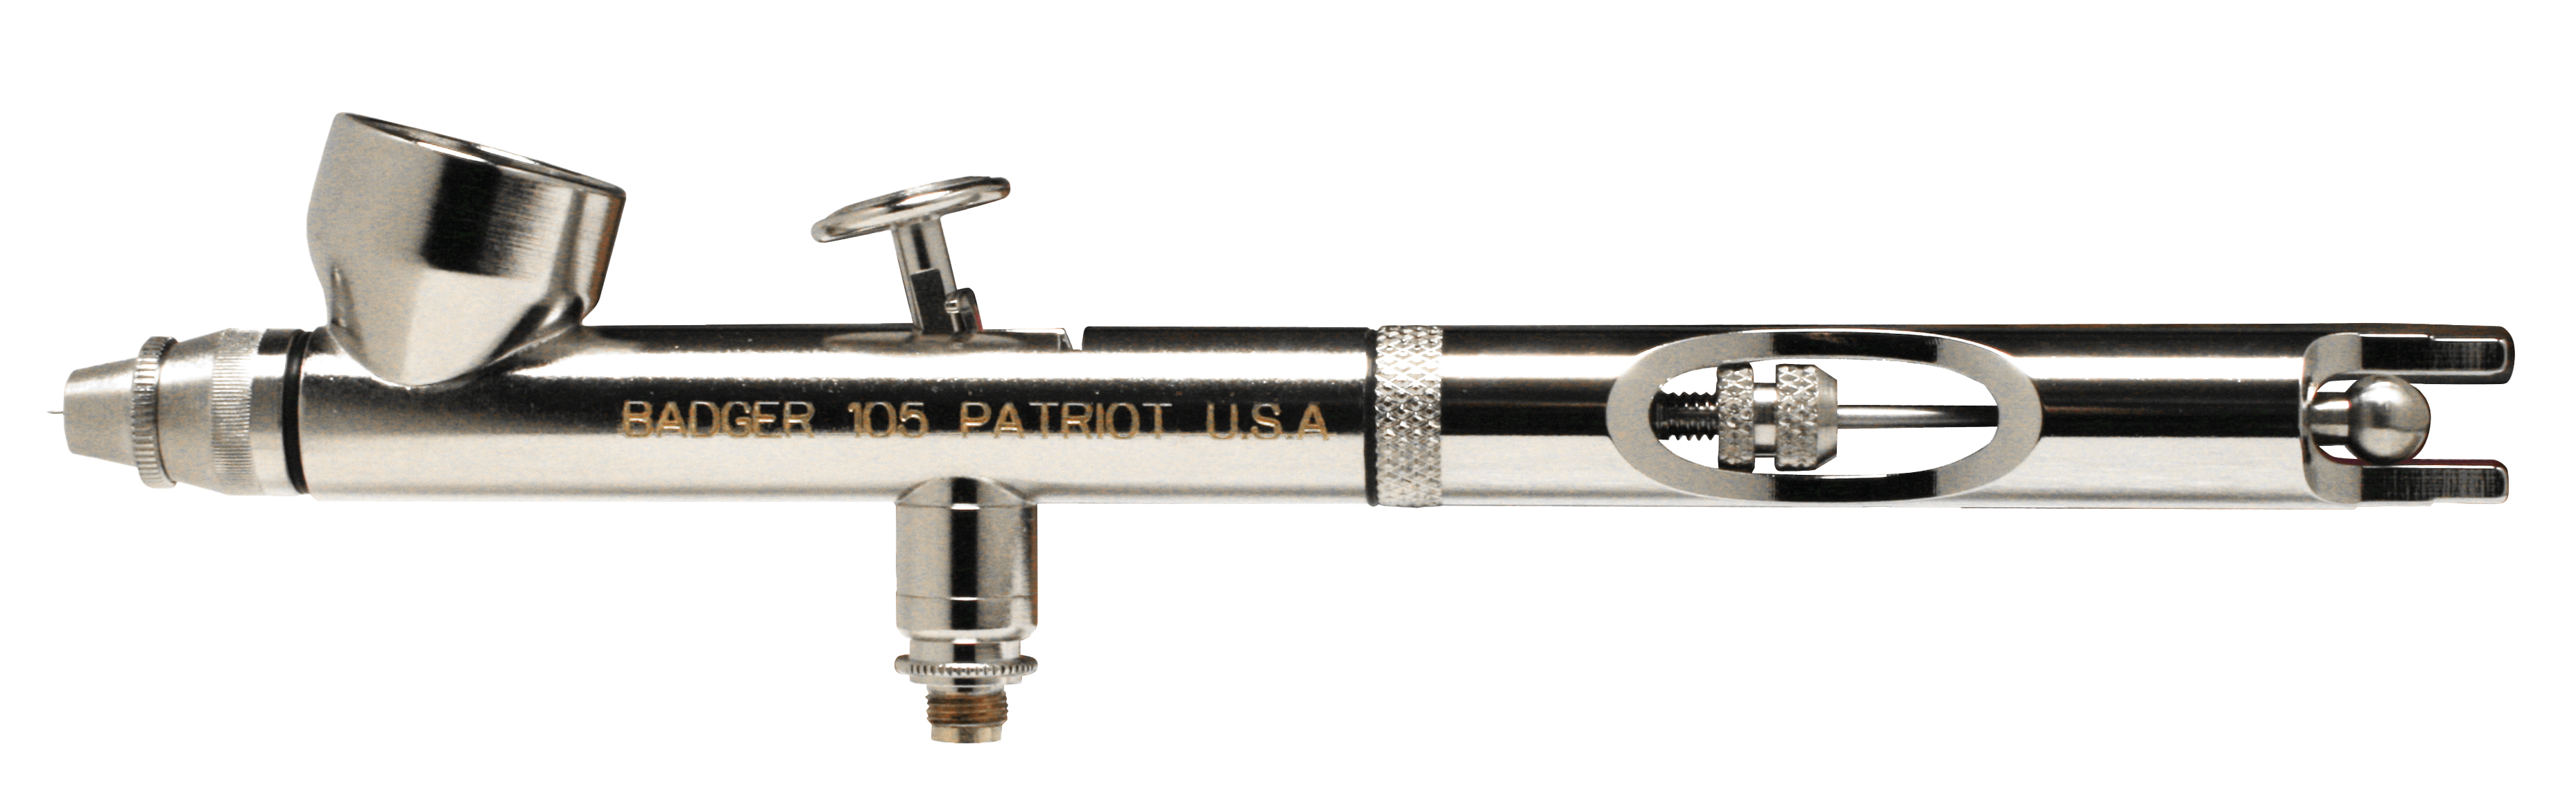 image of the Badger Patriot 105 airbrush